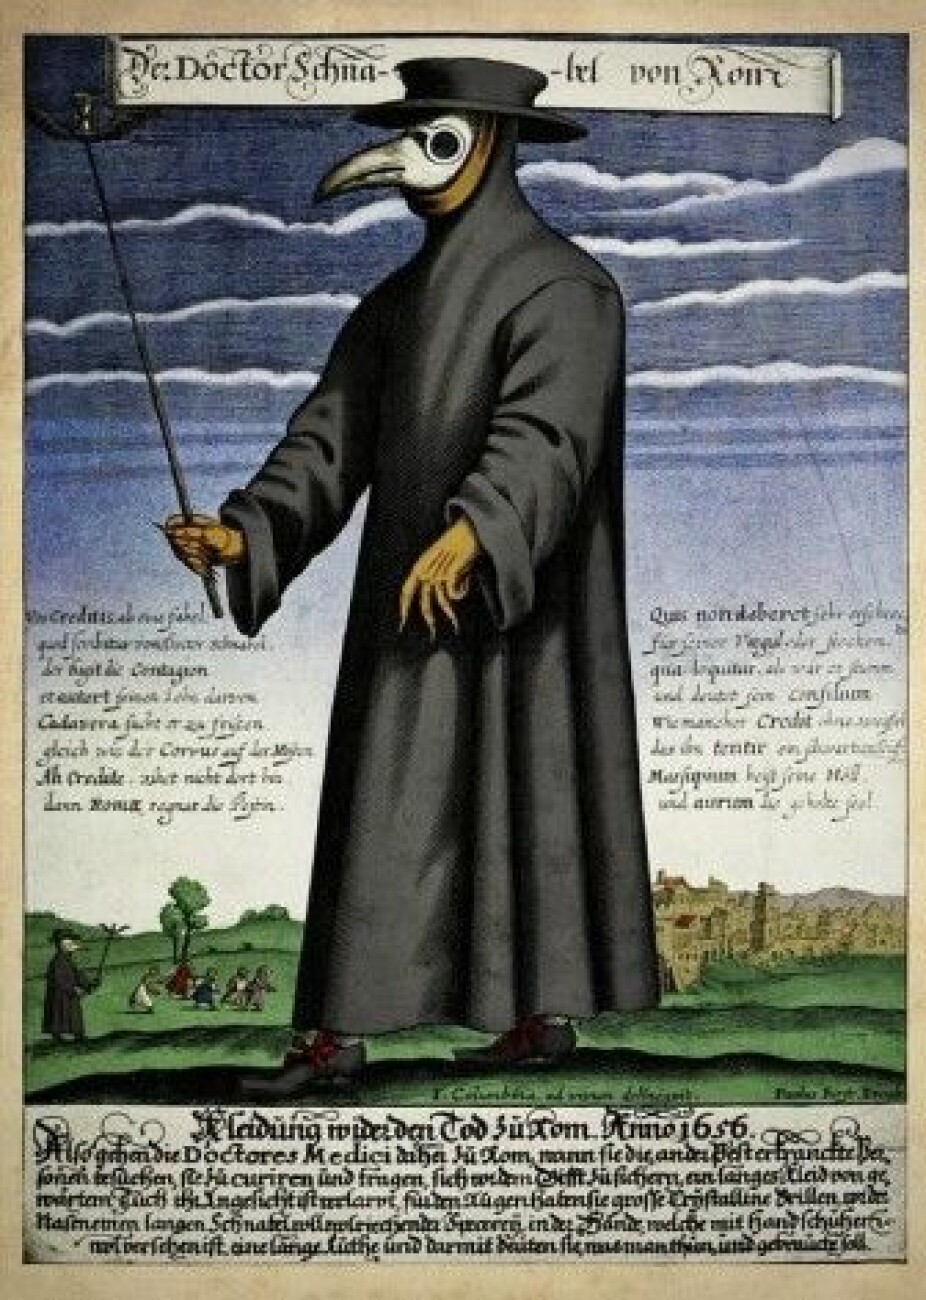 Copper engraving showing a plague doctor in Rome in the 17th century.